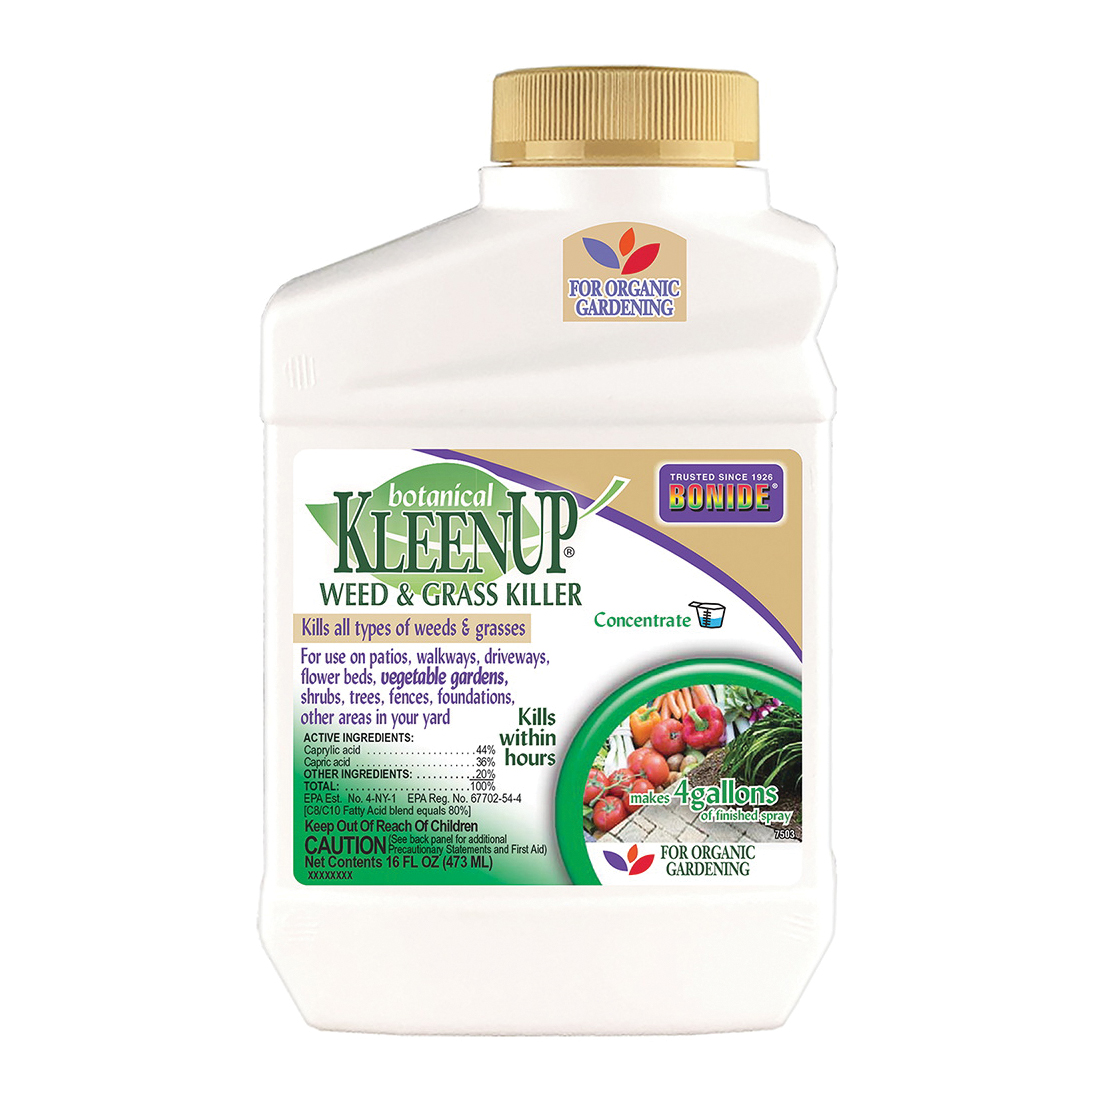 Botanical KleenUp 7503 Concentrated Weed and Grass Killer, 1 pt